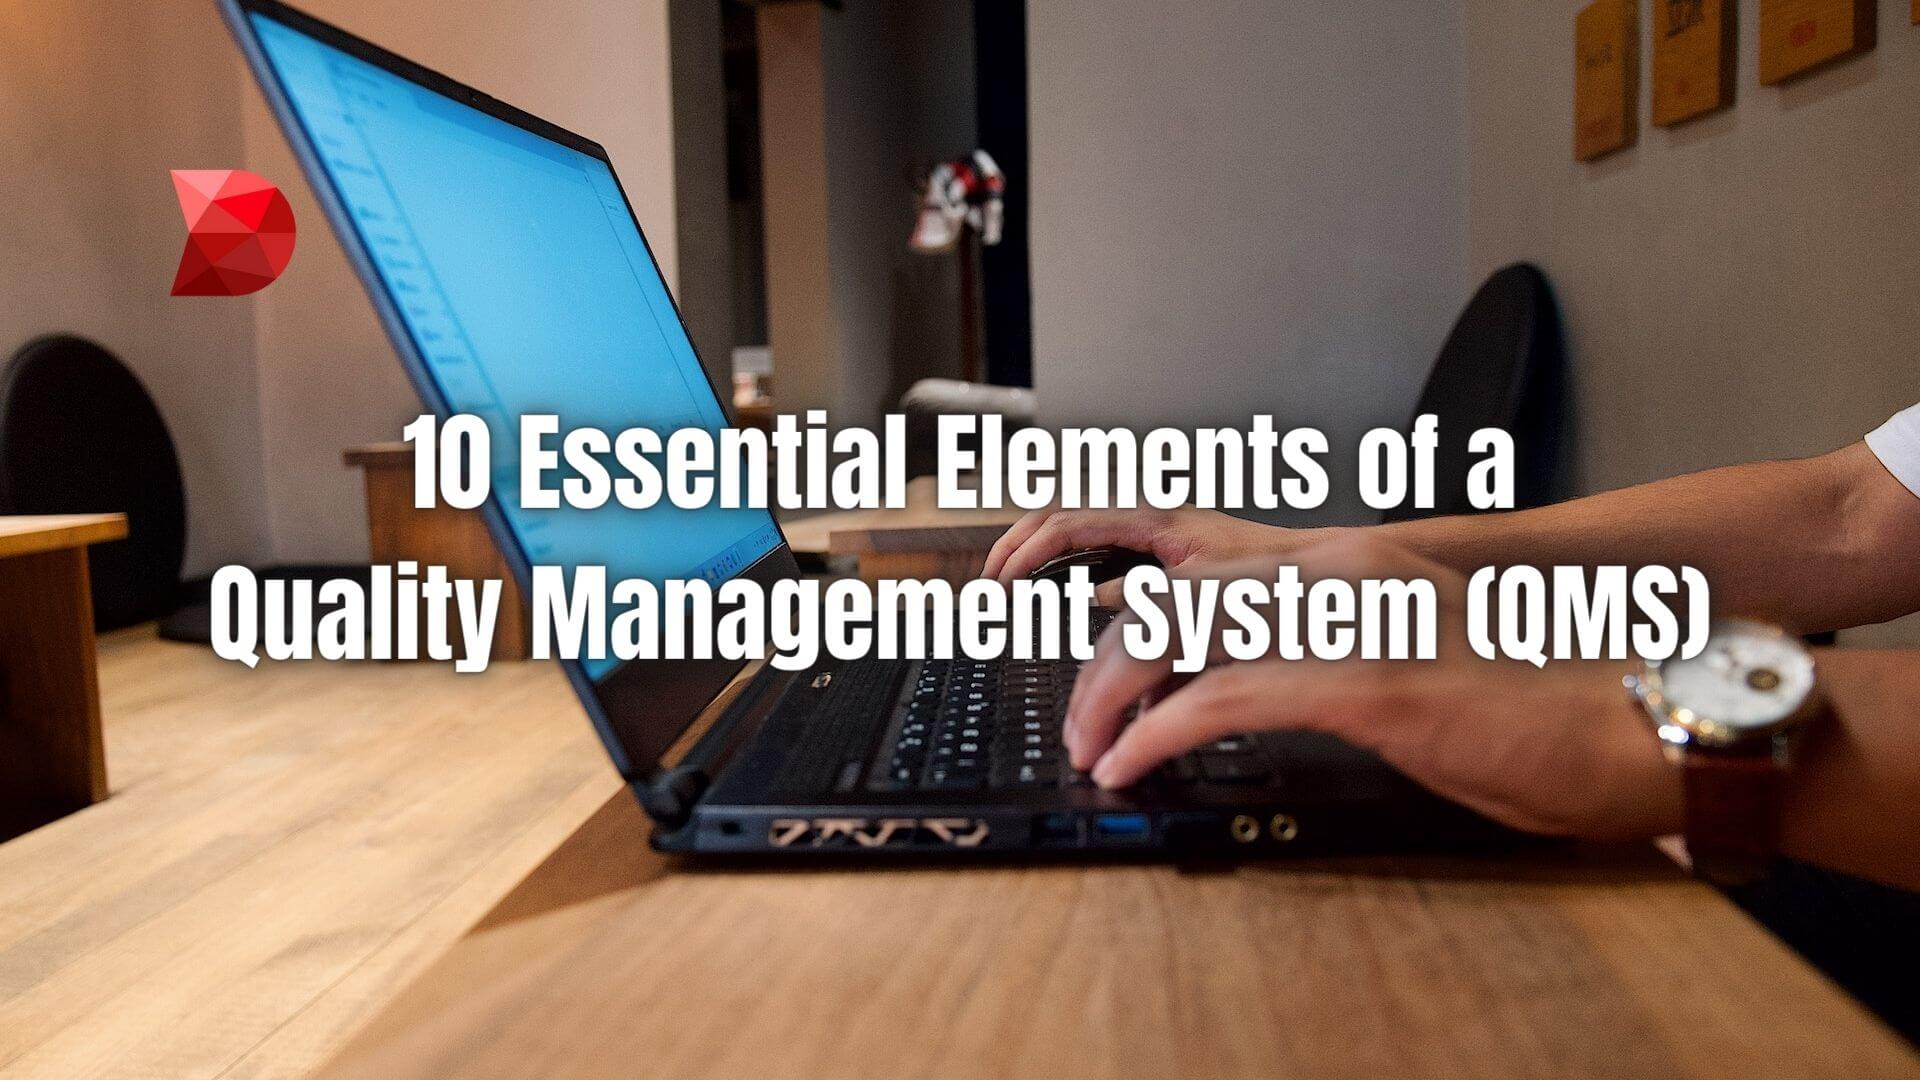 The 10 elements of a quality management system play a vital role in enhancing the quality standards of any organization. Learn more!